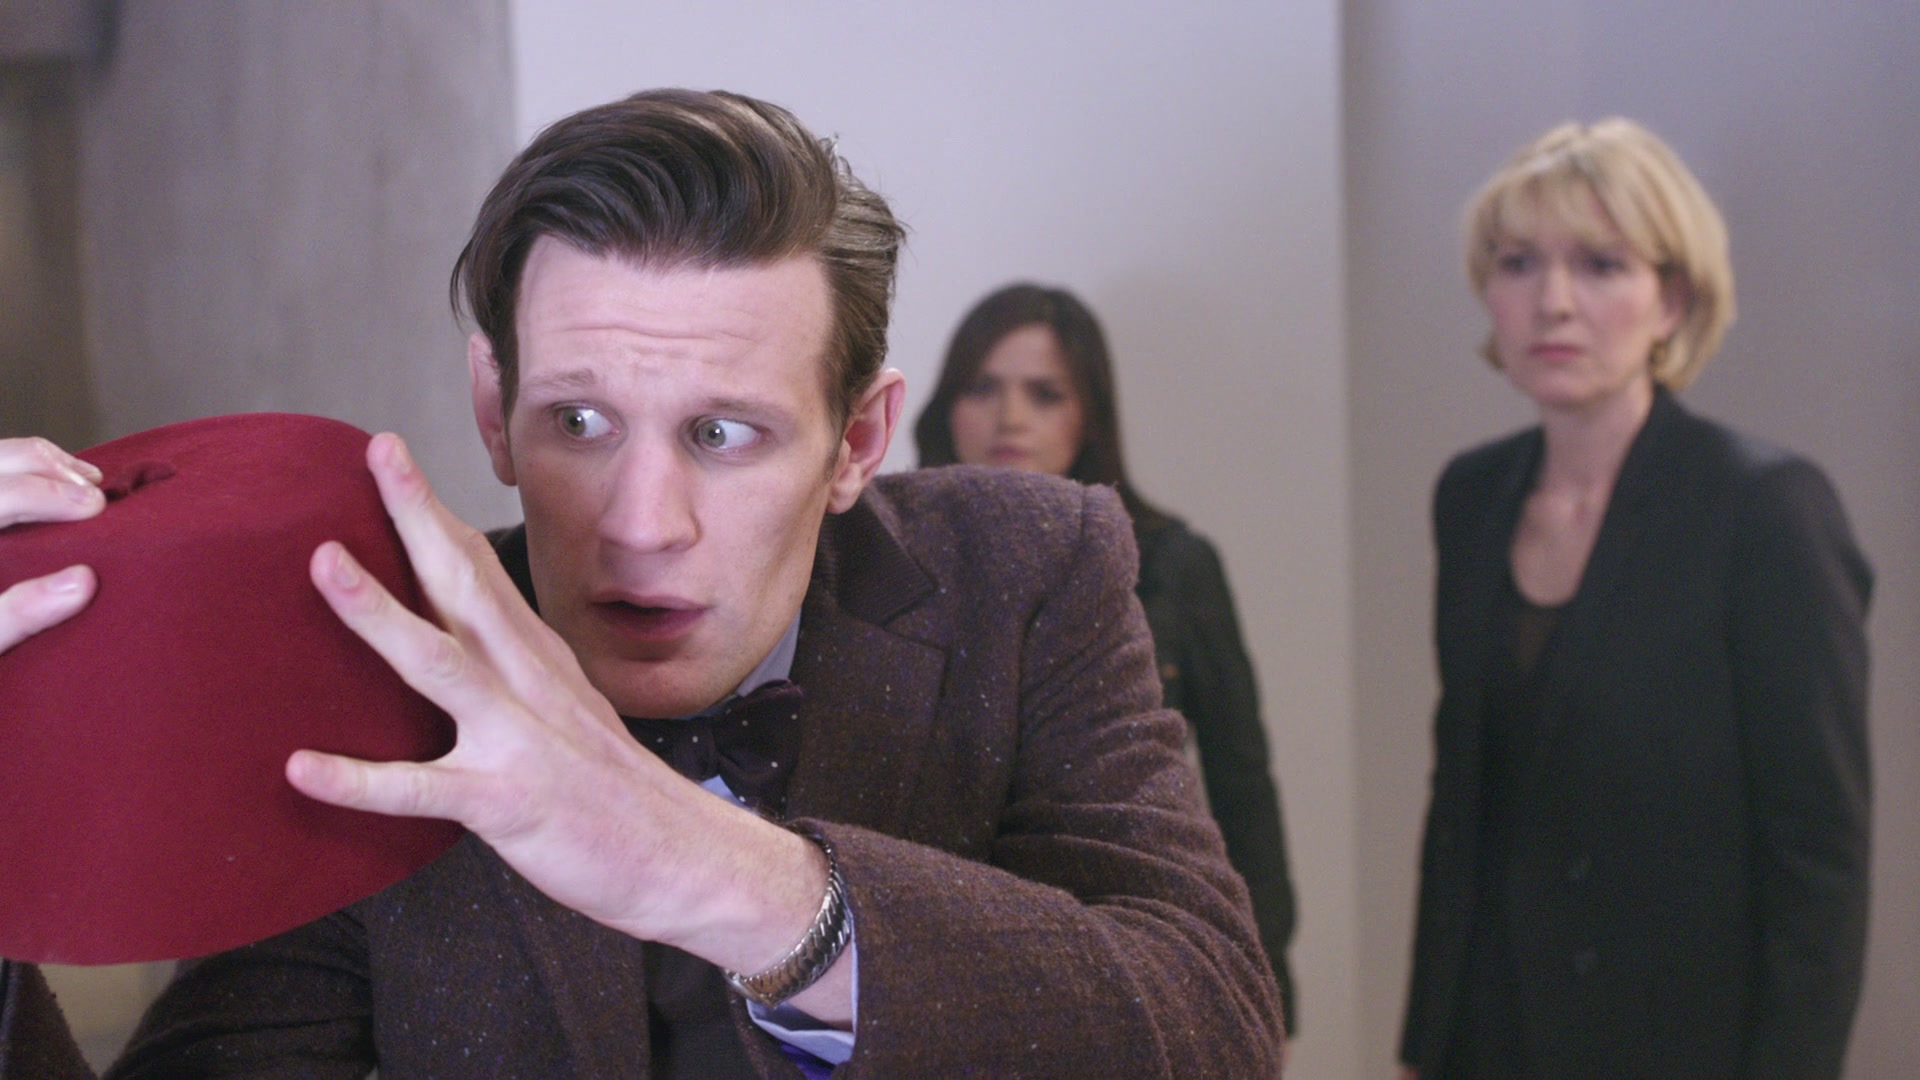 DayOfTheDoctor-Caps-0448.jpg